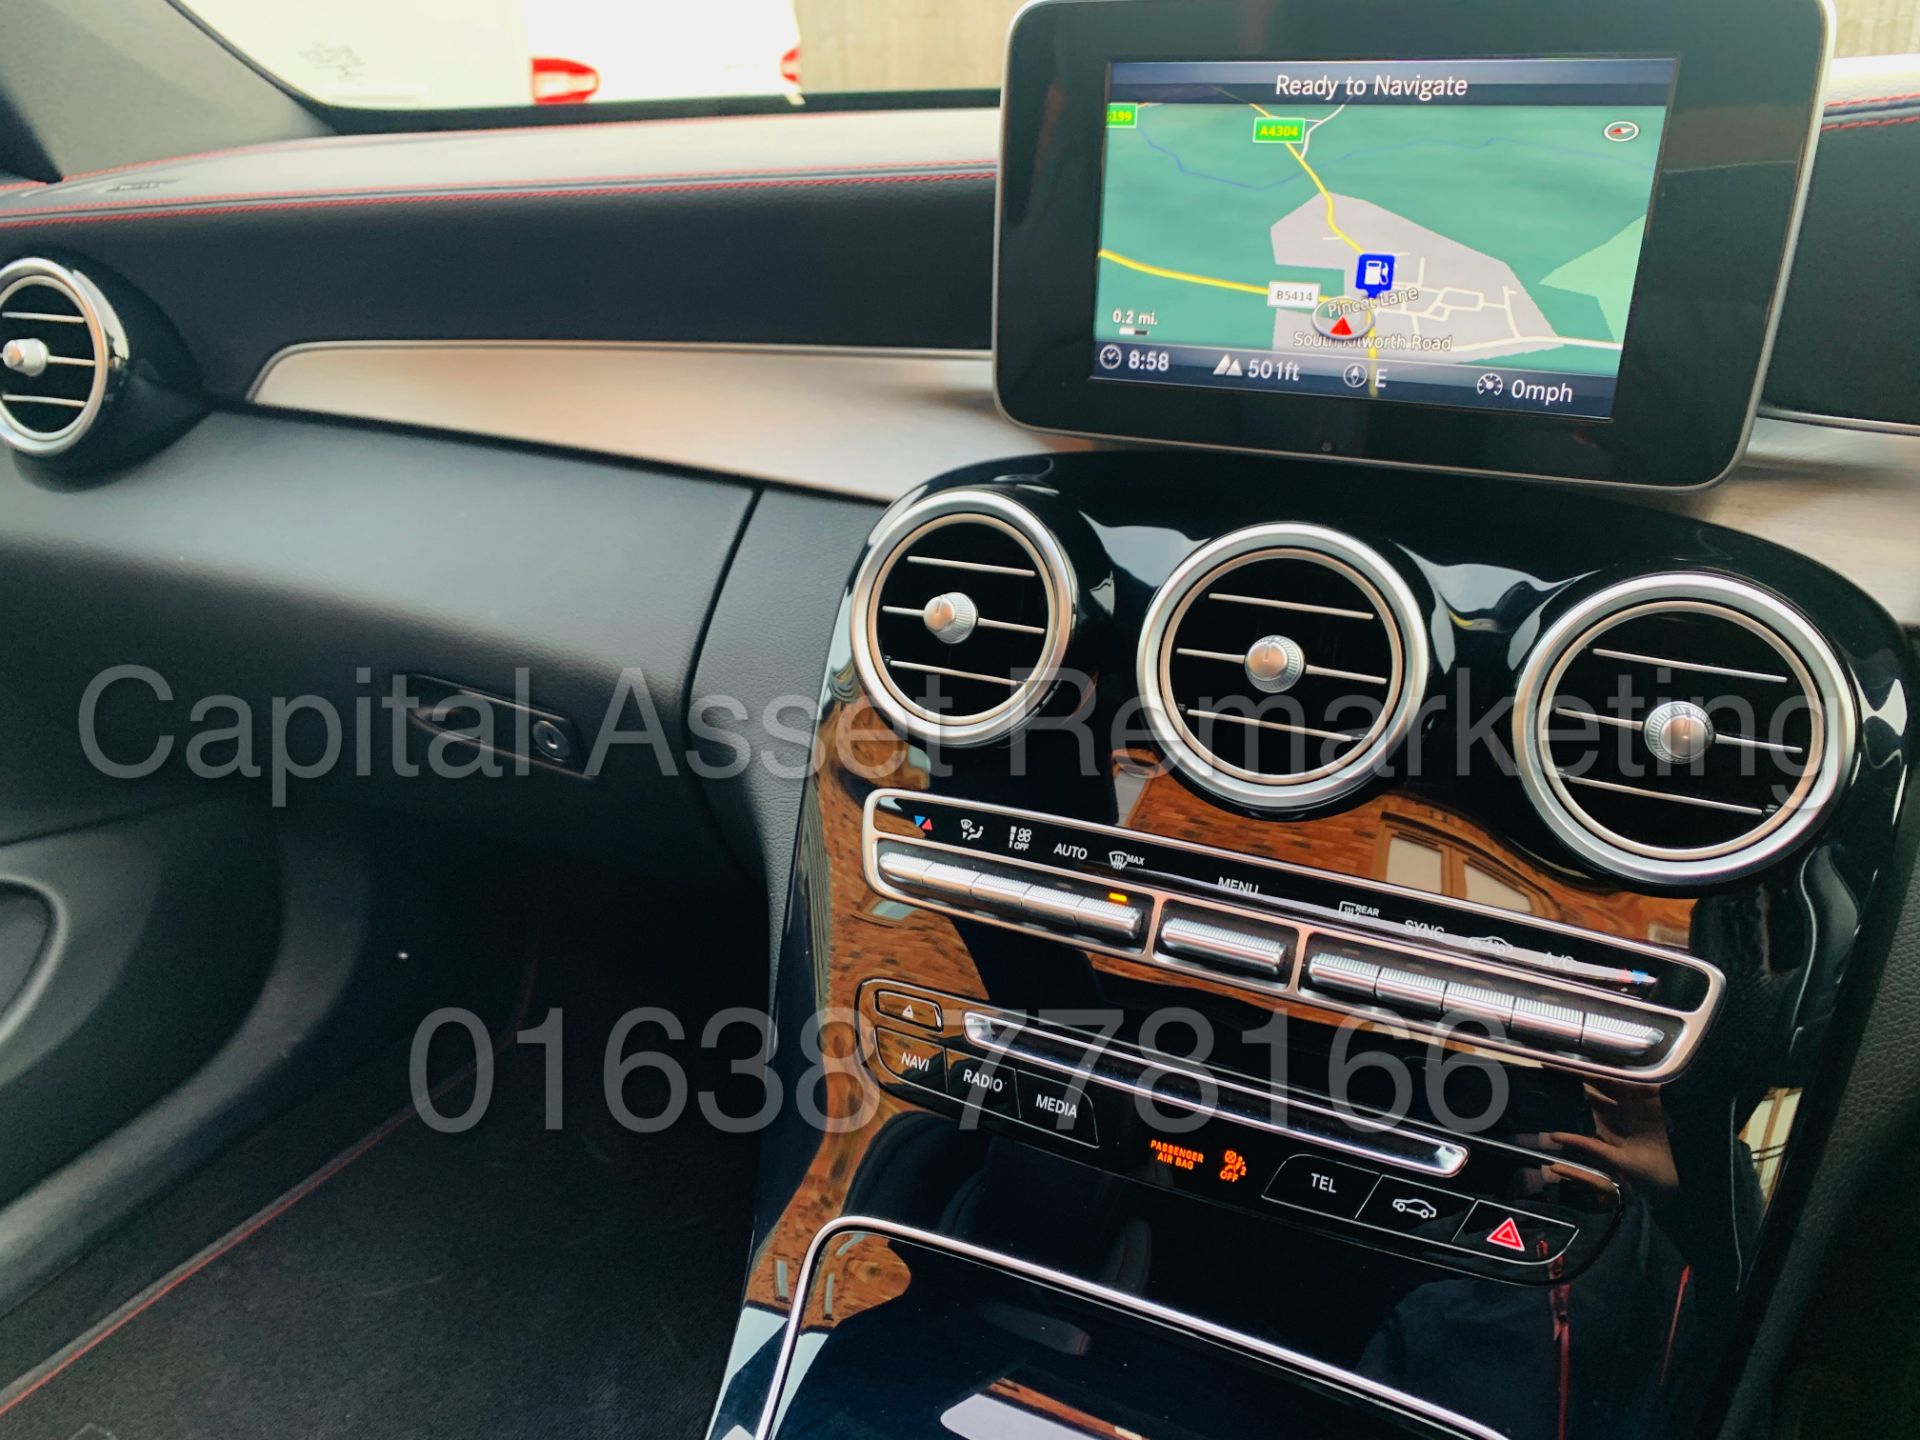 MERCEDES-BENZ C43 AMG *PREMIUM 4 MATIC* COUPE (2017) '9-G AUTO - LEATHER - SAT NAV' **FULLY LOADED** - Image 39 of 46